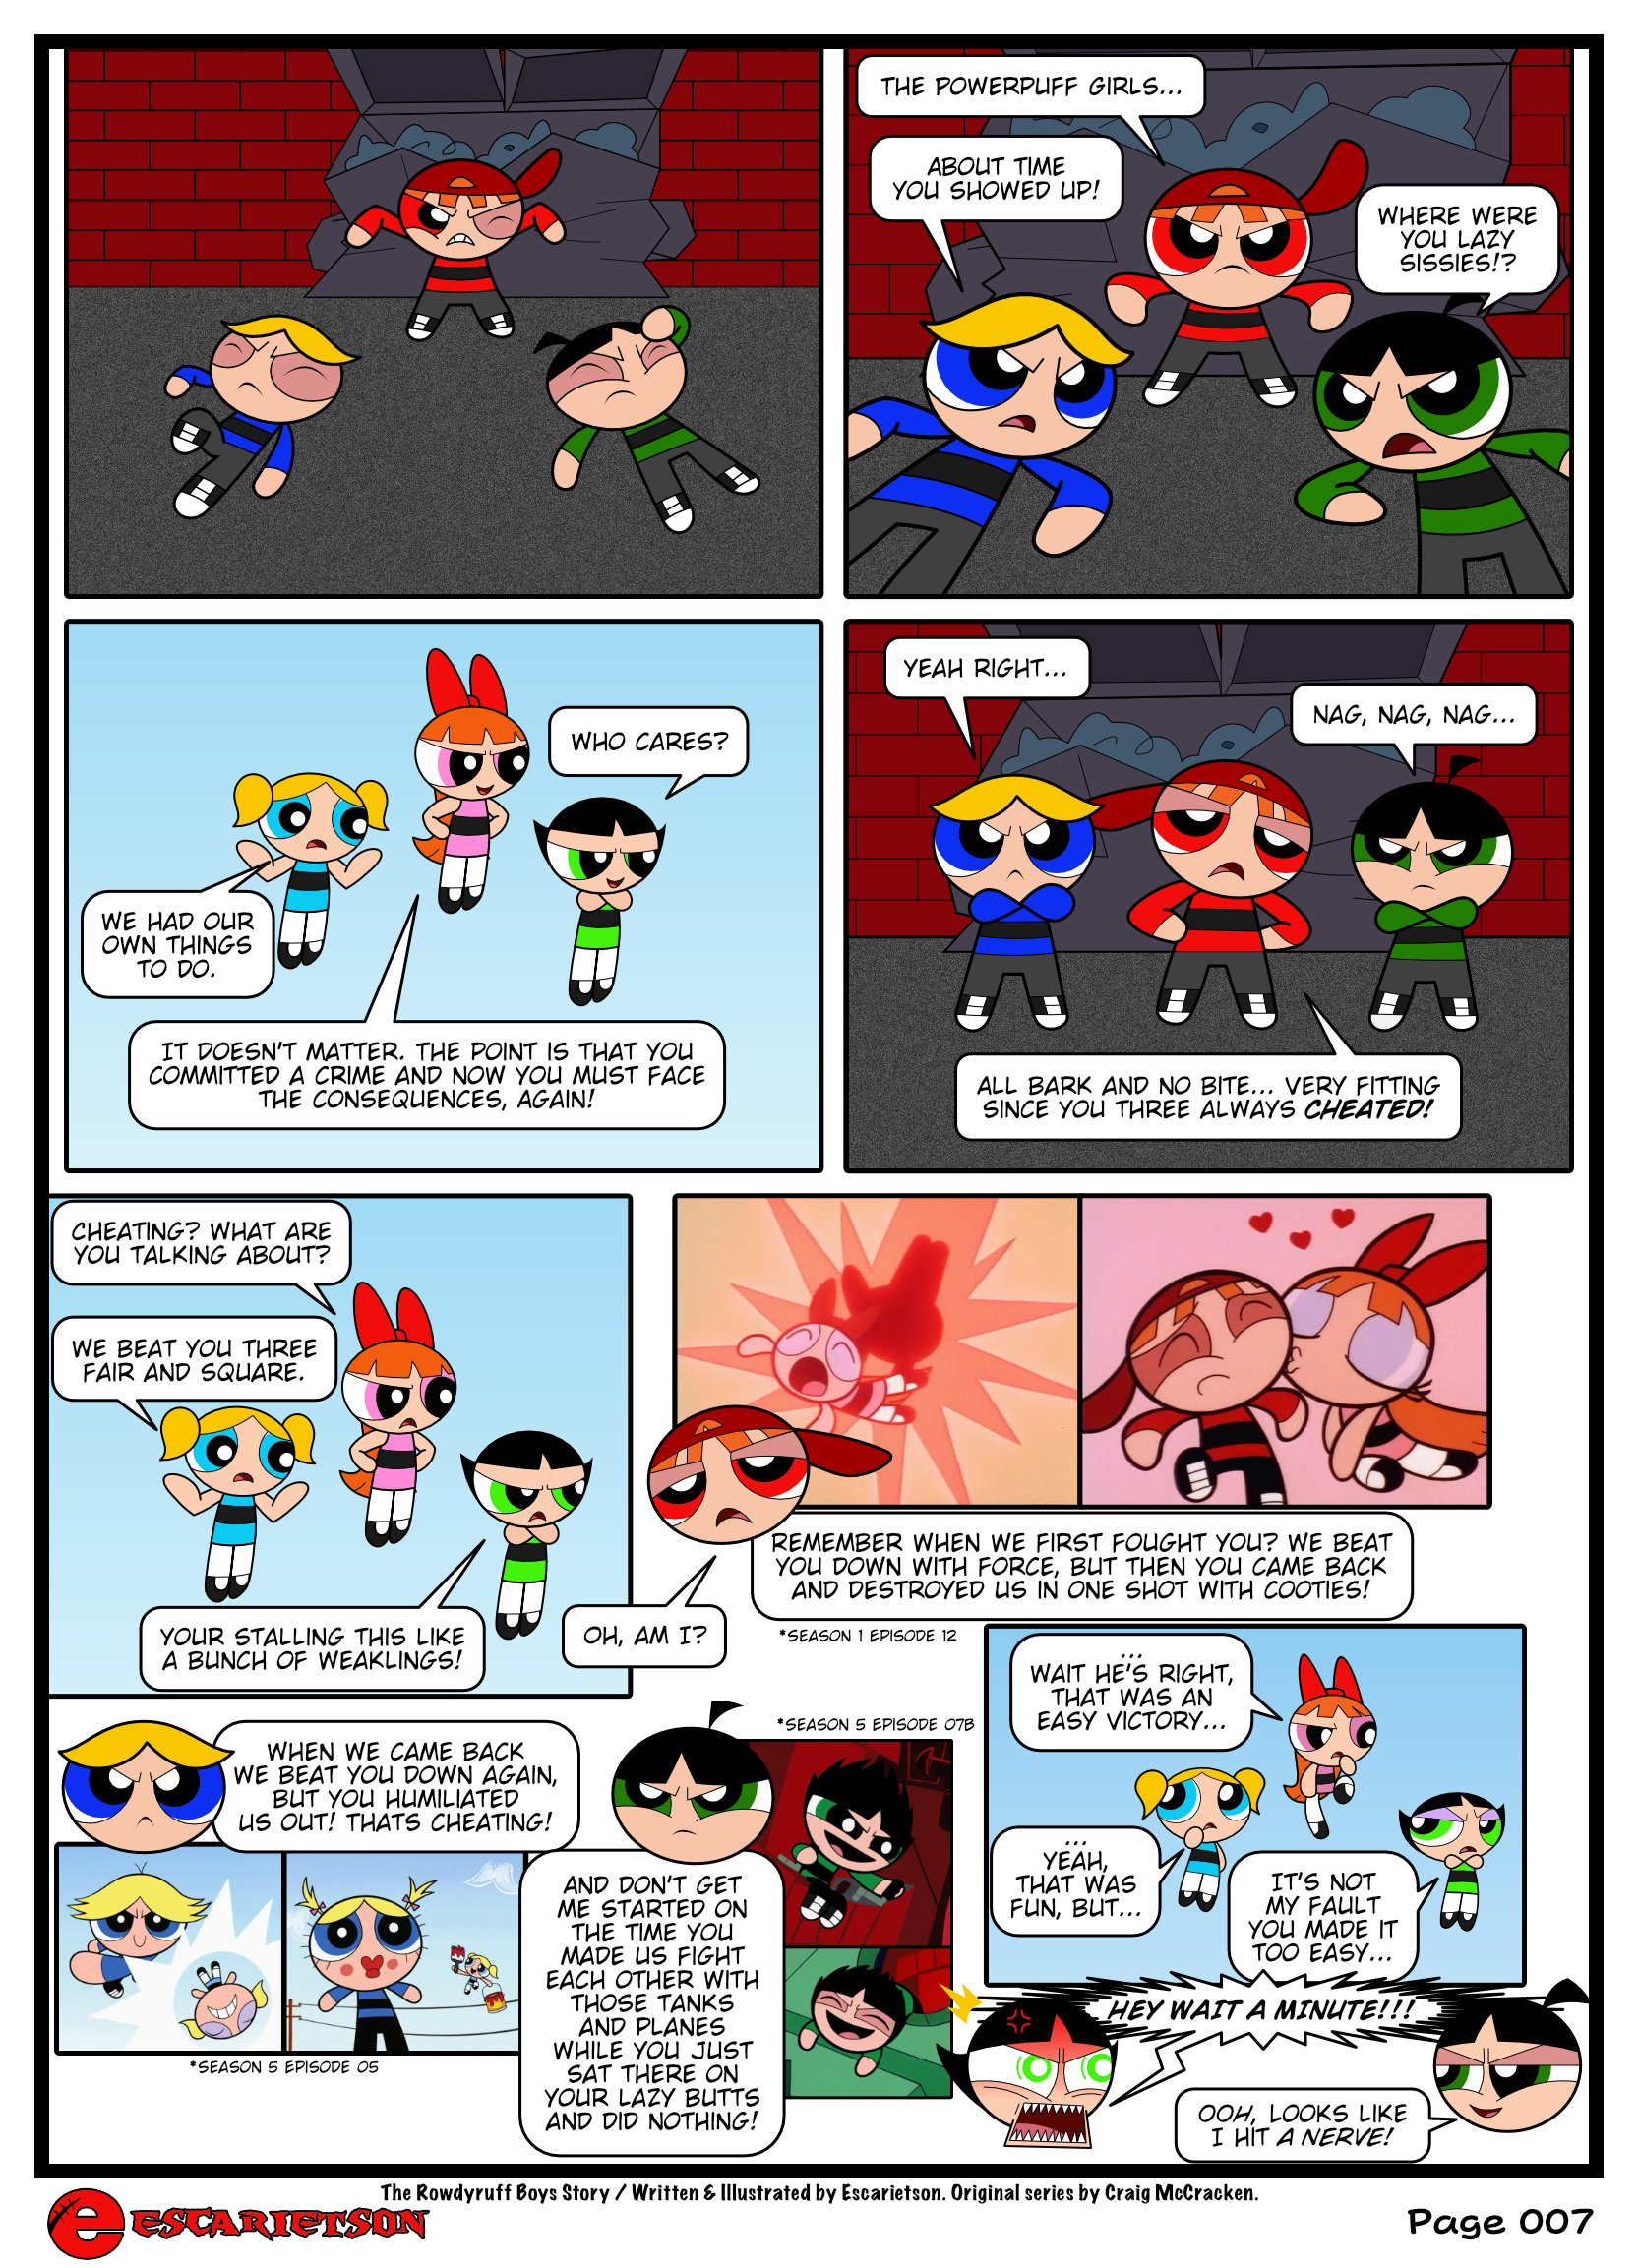 The Rowdyruff Boys Story - Page 007